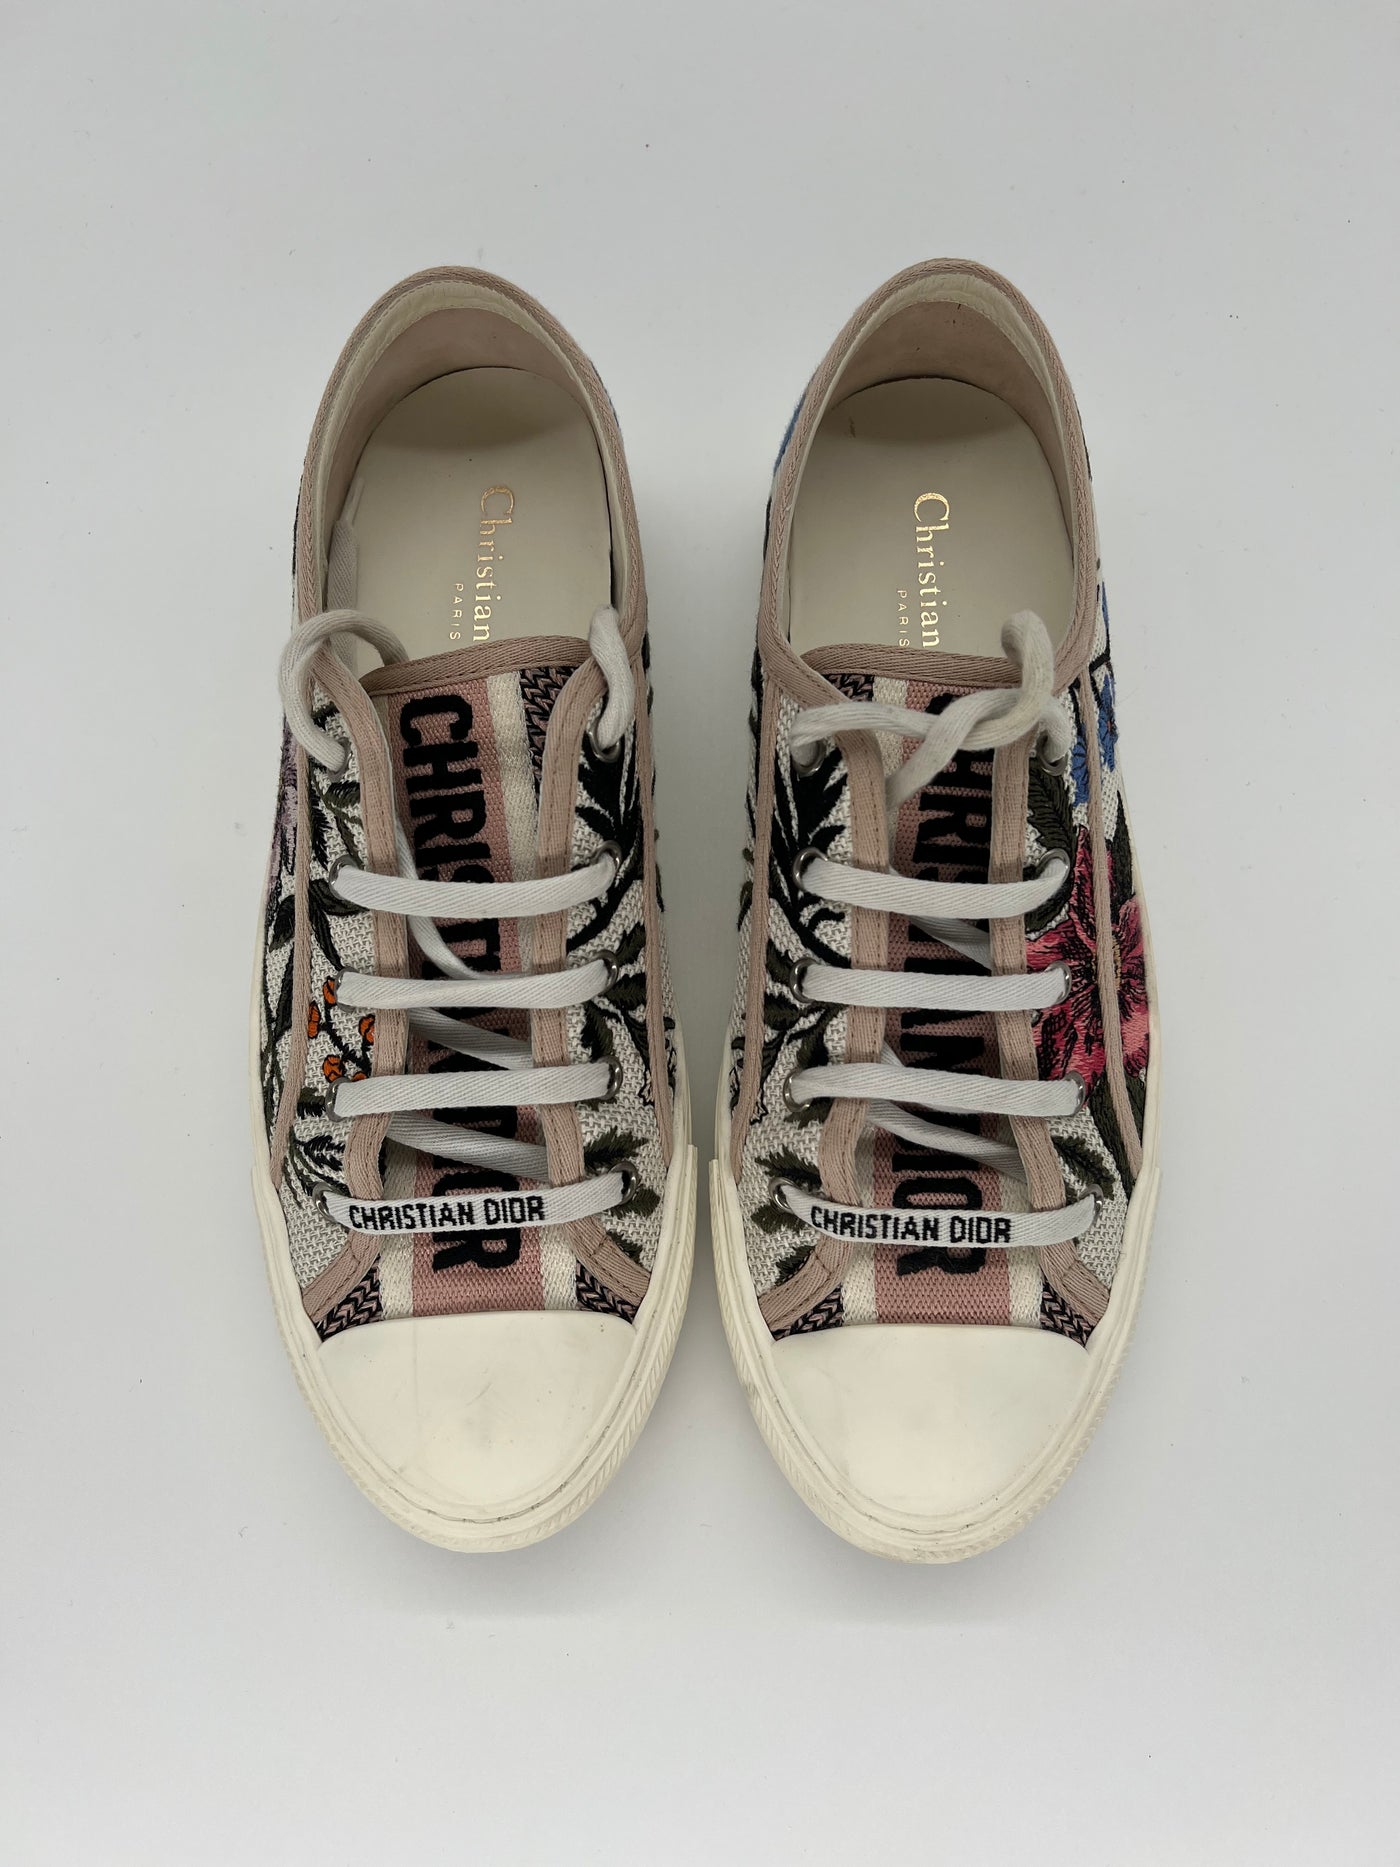 Dior Floral Sneaker - Size 41 - SOLD